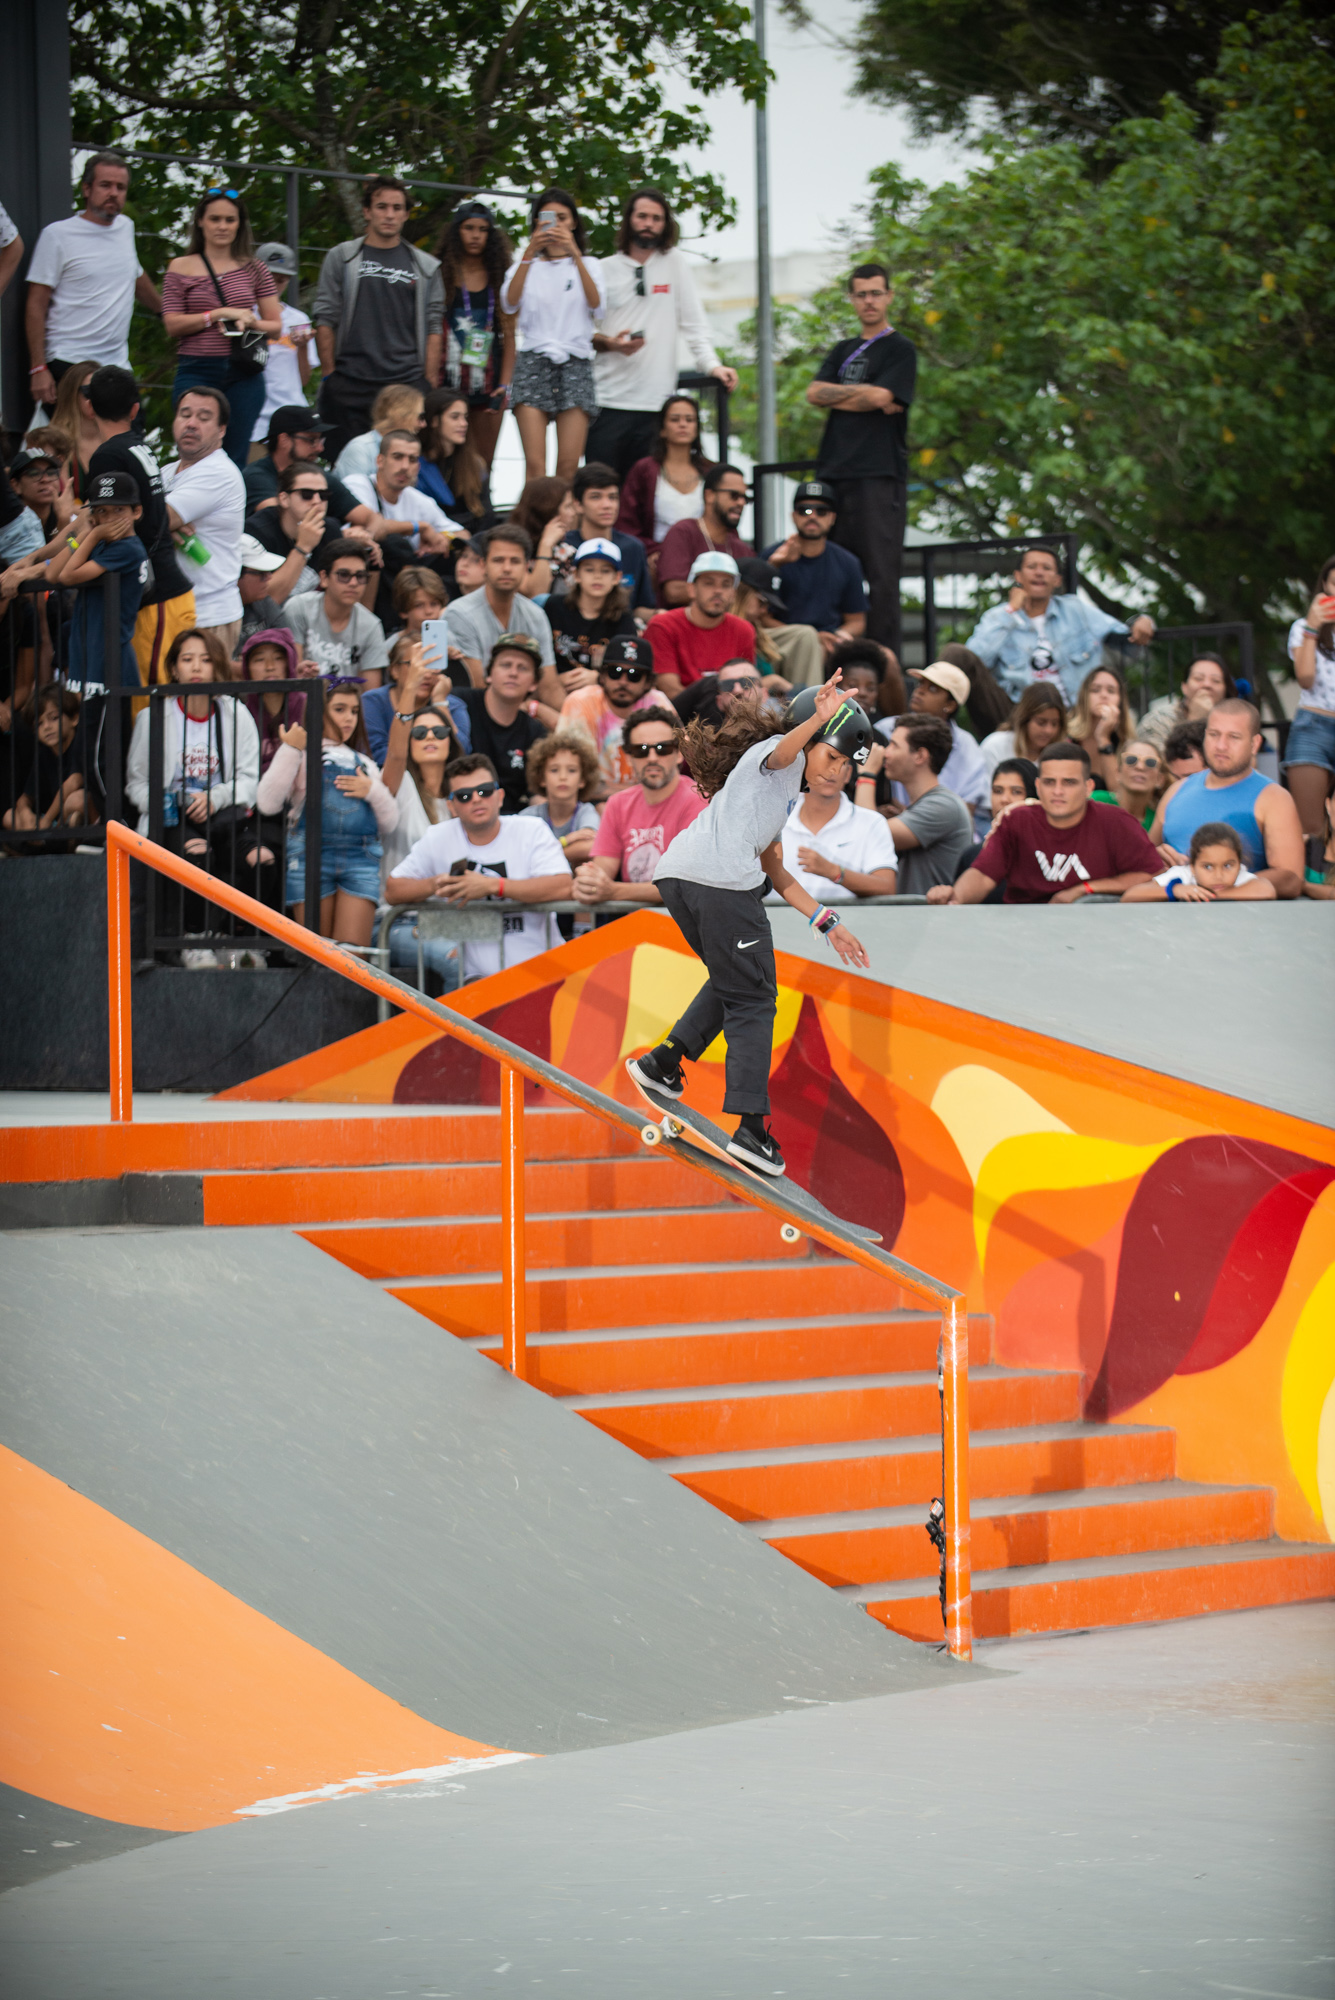 Monster Energy’s Rayssa Leal Takes Second Place in Women’s Skate Street at Oi STU Open in Brazil